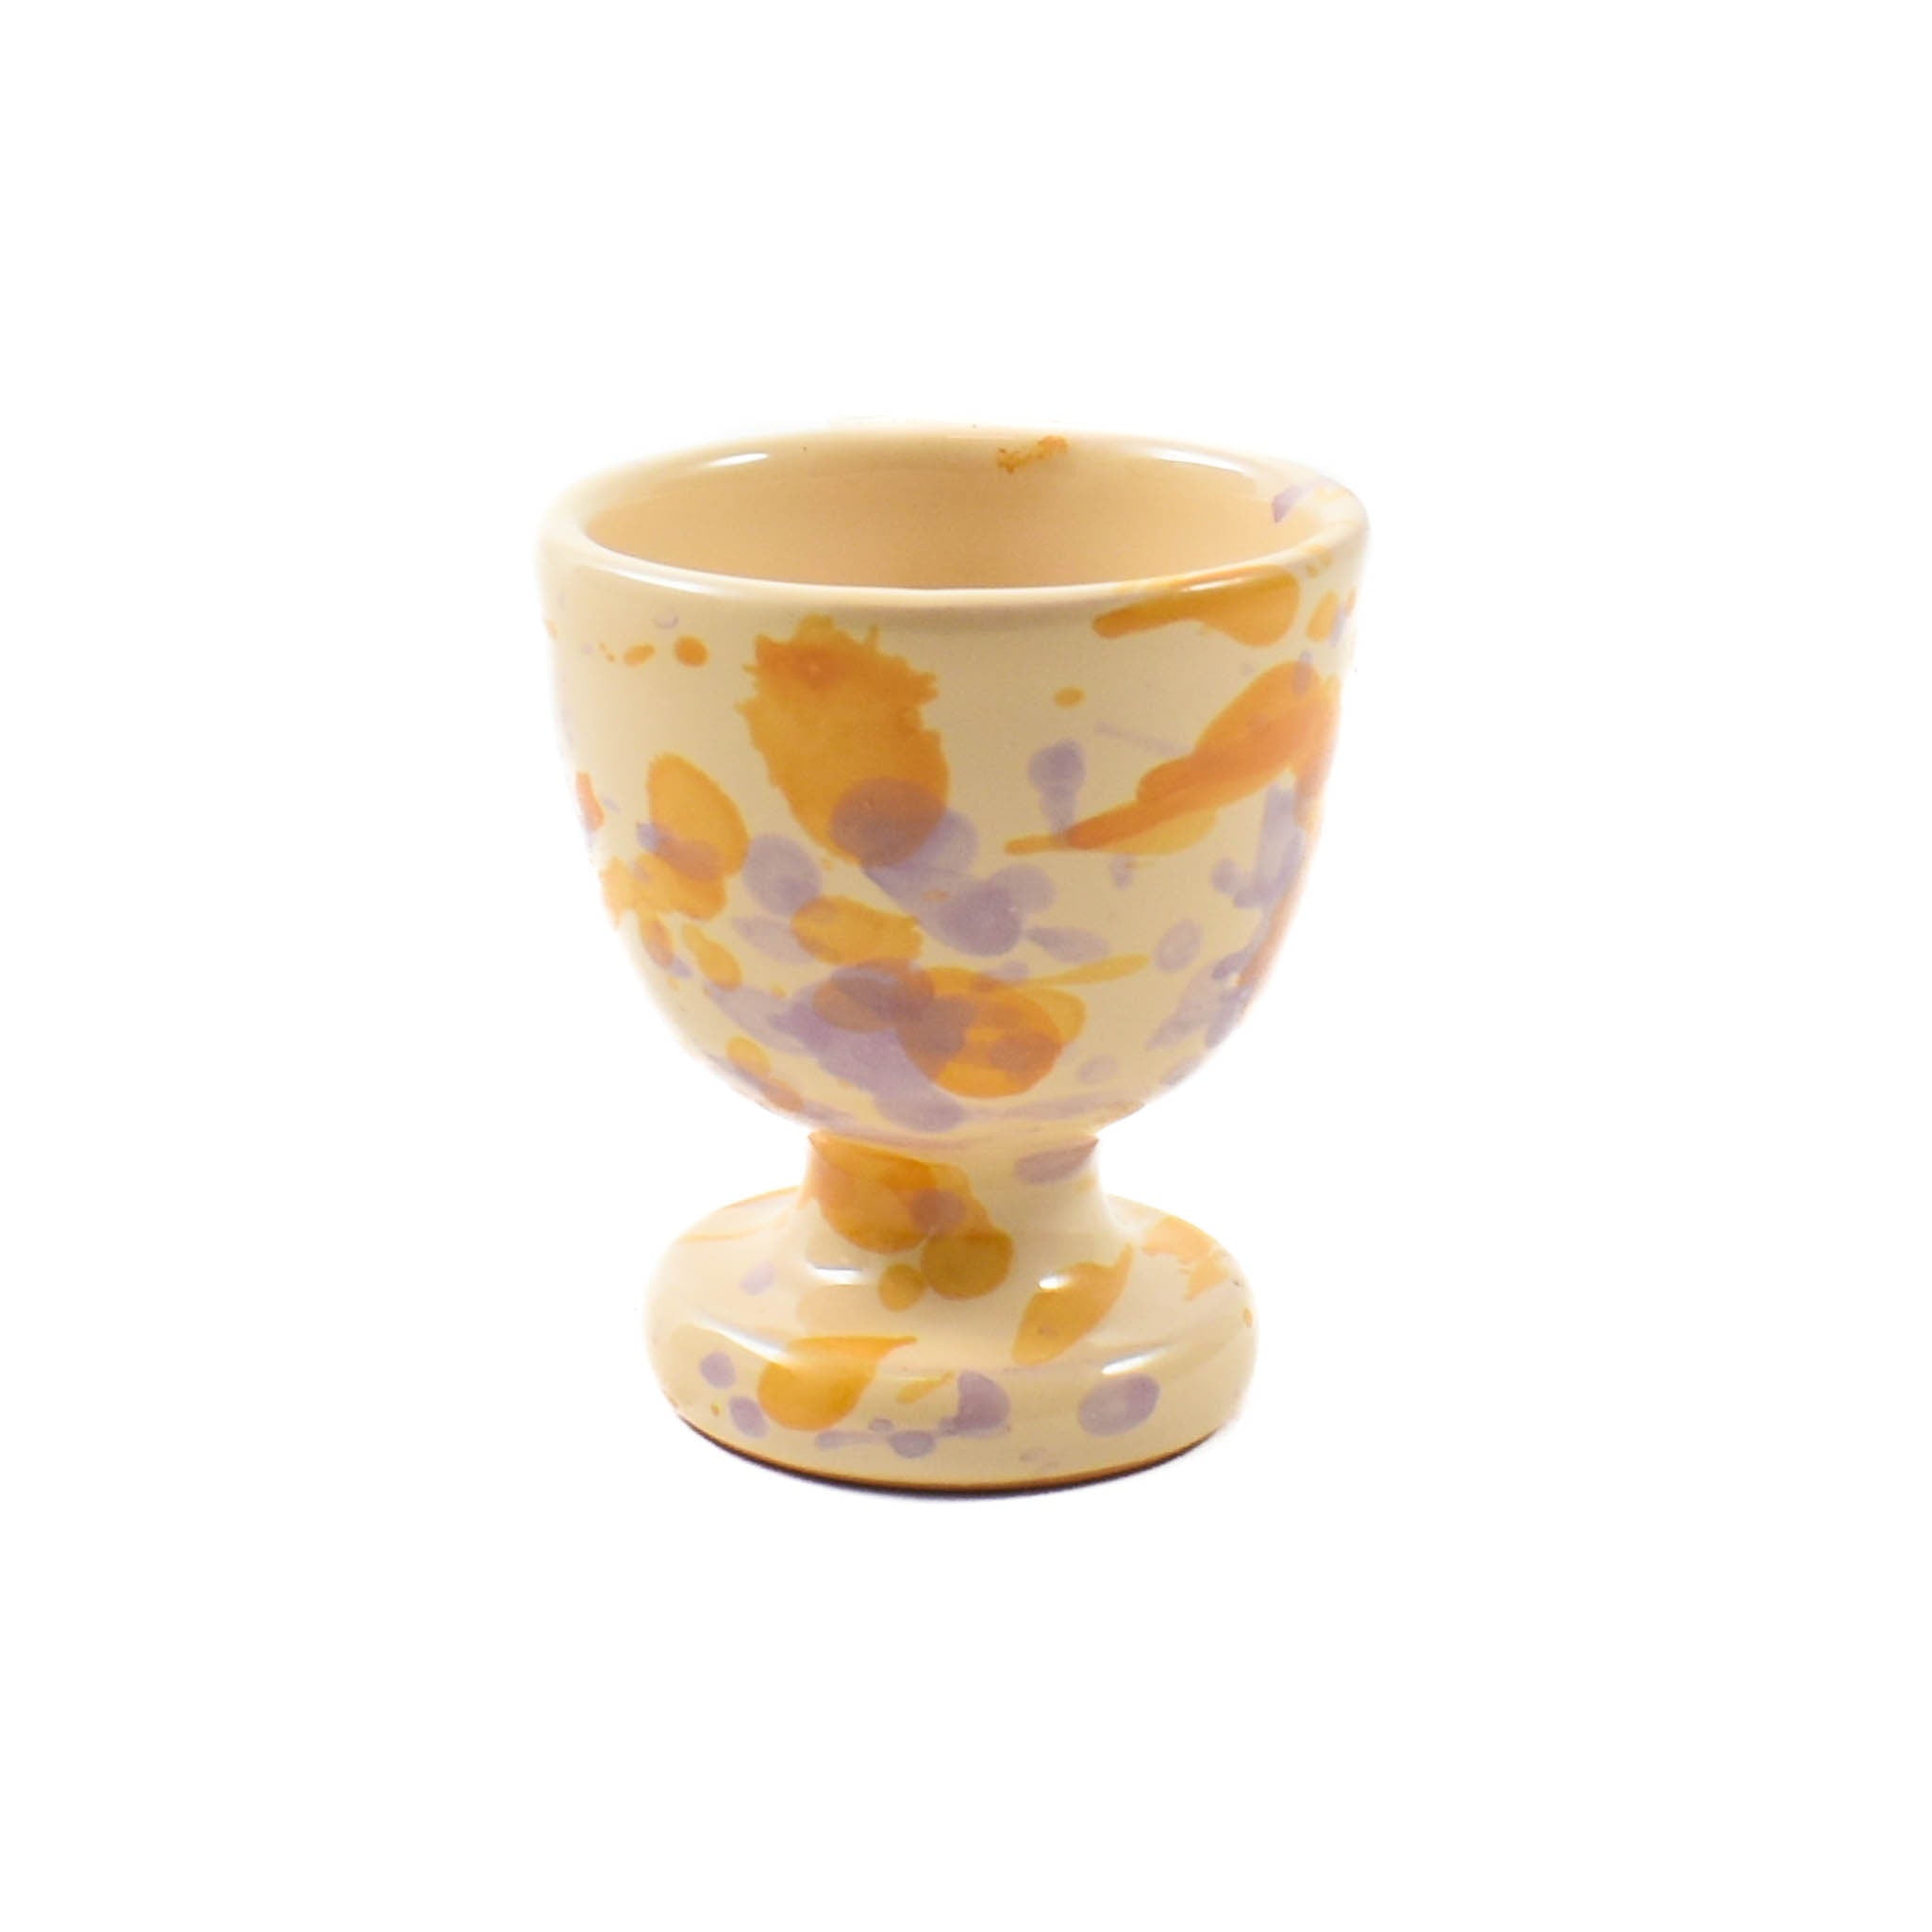 Puglia Lilac and Yellow Splatter Egg Cup